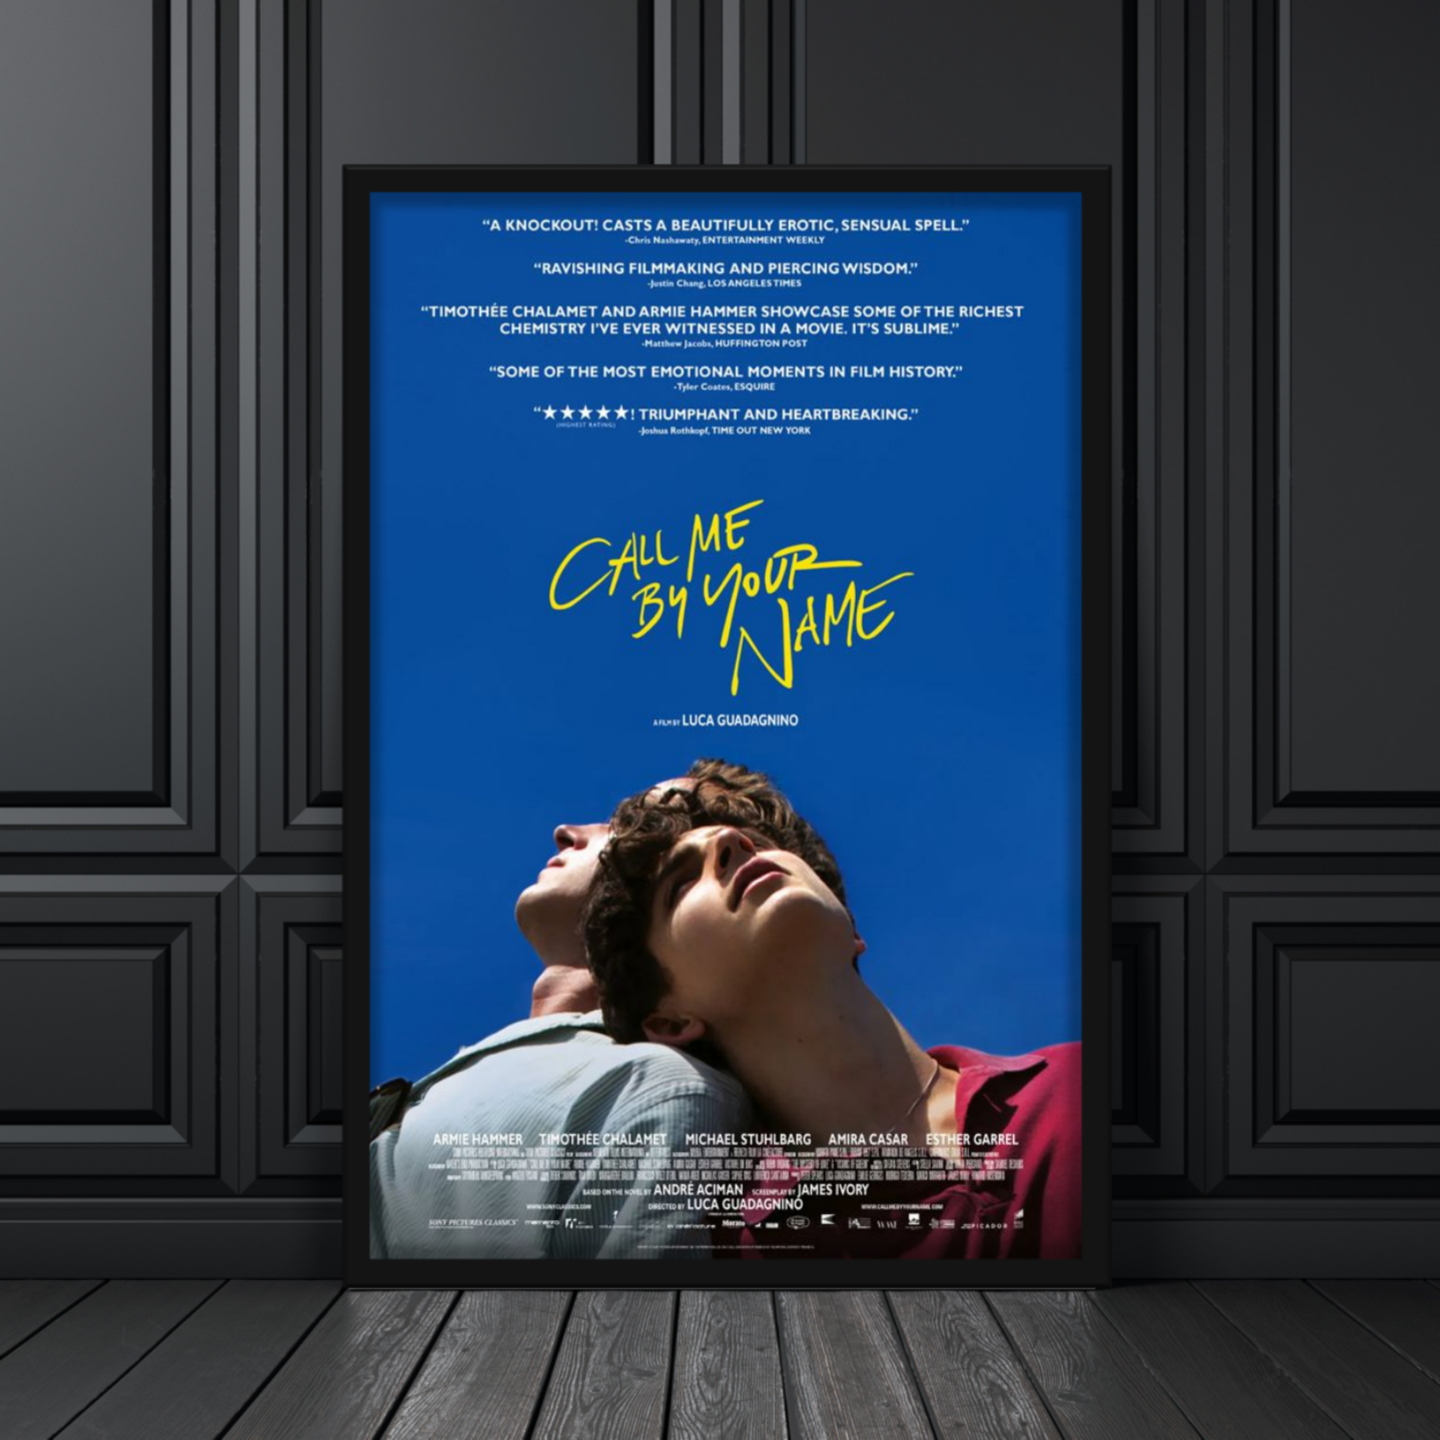 Original Posters Romance Comedy Call Me By Your Name Poster Hub